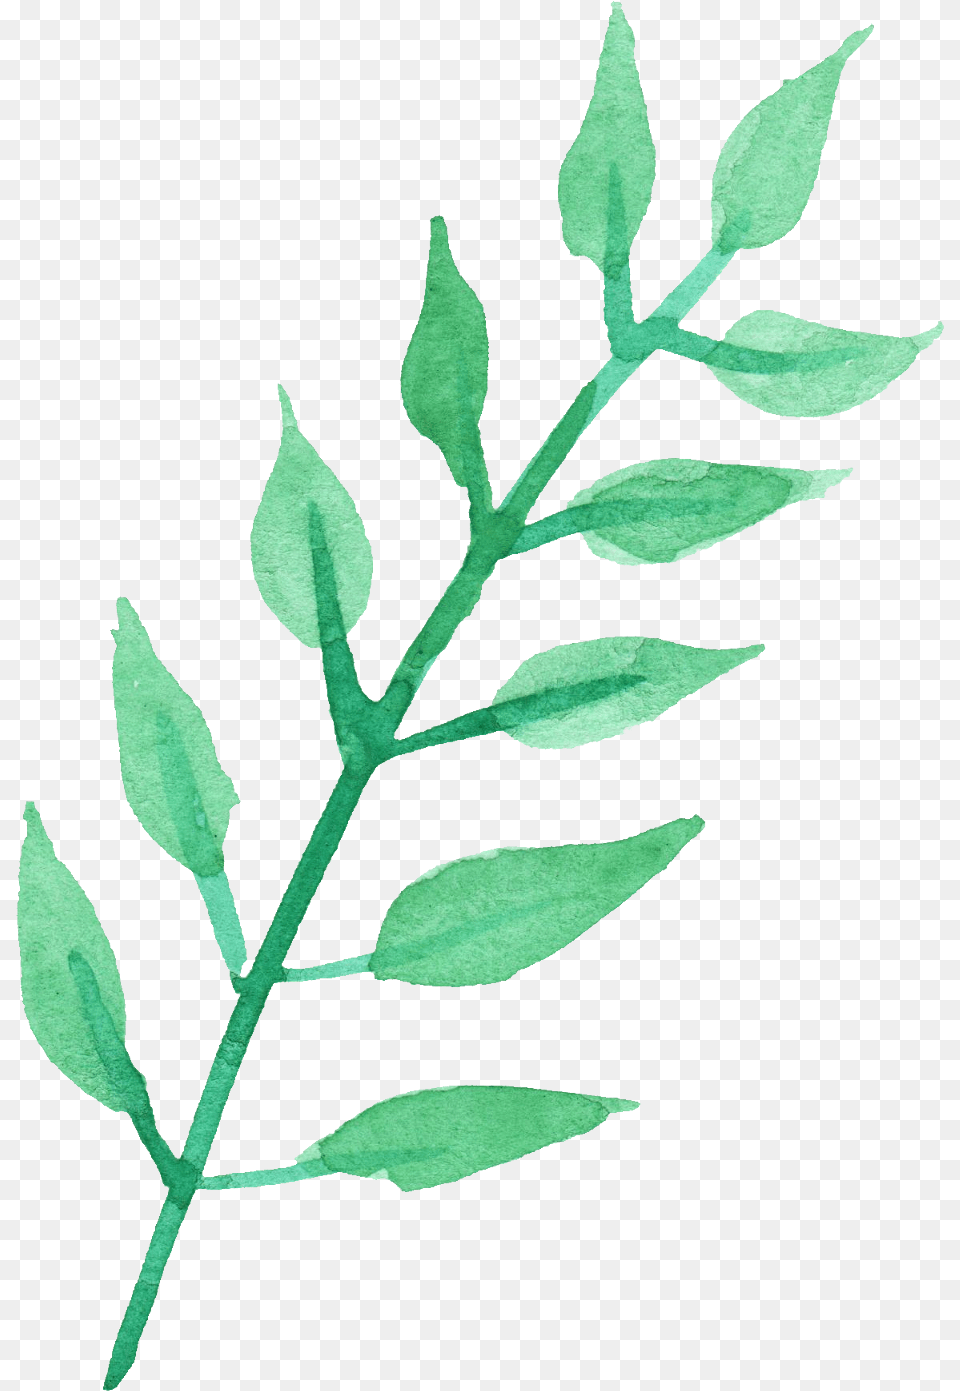 Stem Of A Plant Transparent Images Watercolor Leaves Watercolor Leaves Transparent Background, Herbal, Herbs, Leaf, Grass Png Image